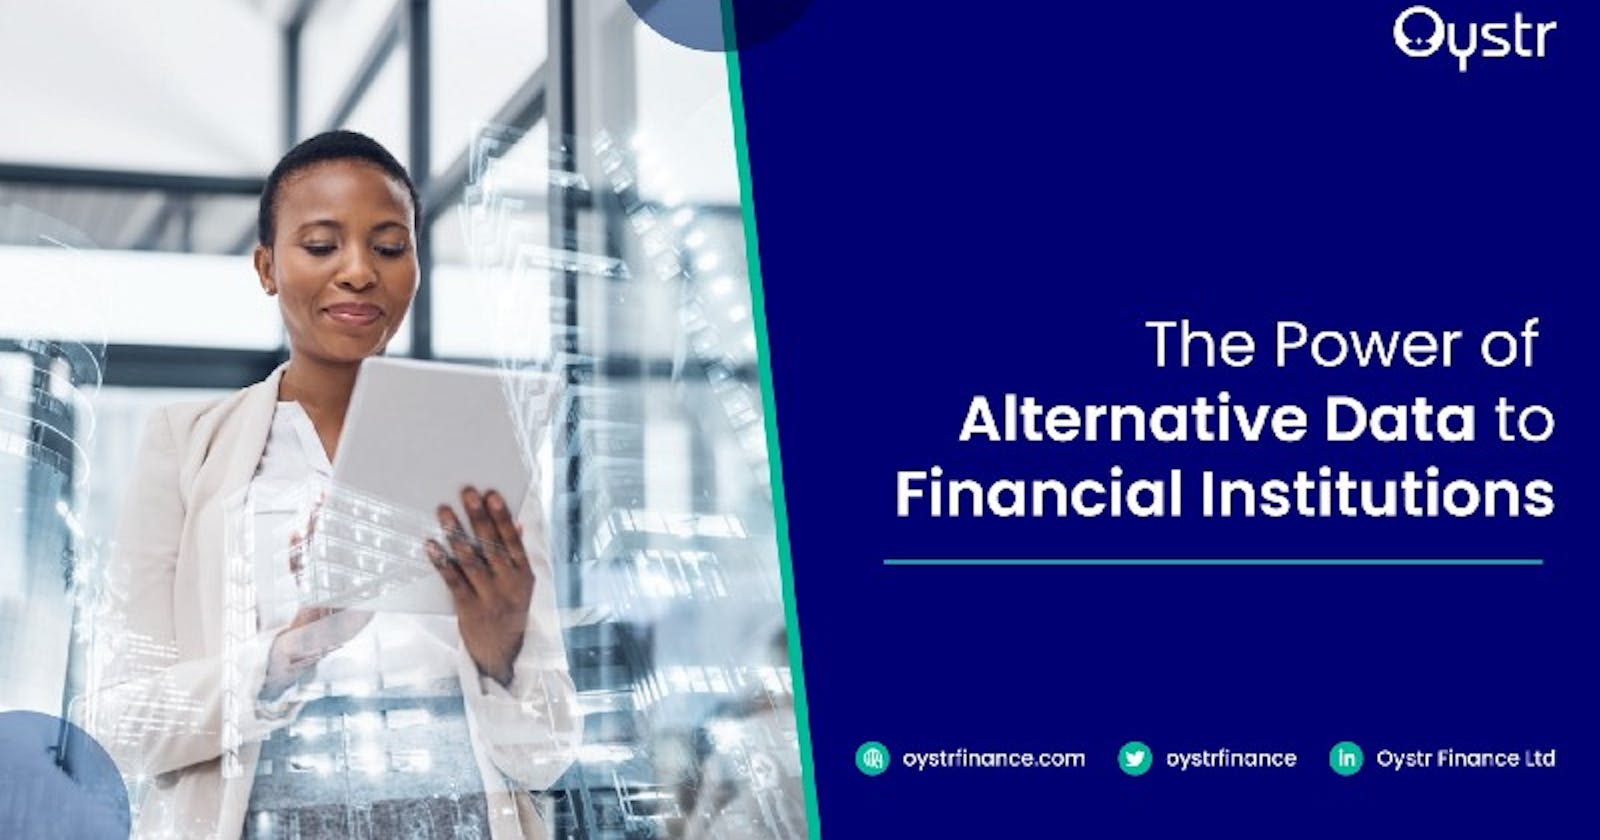 The Power of Alternative Data to Financial Institutions